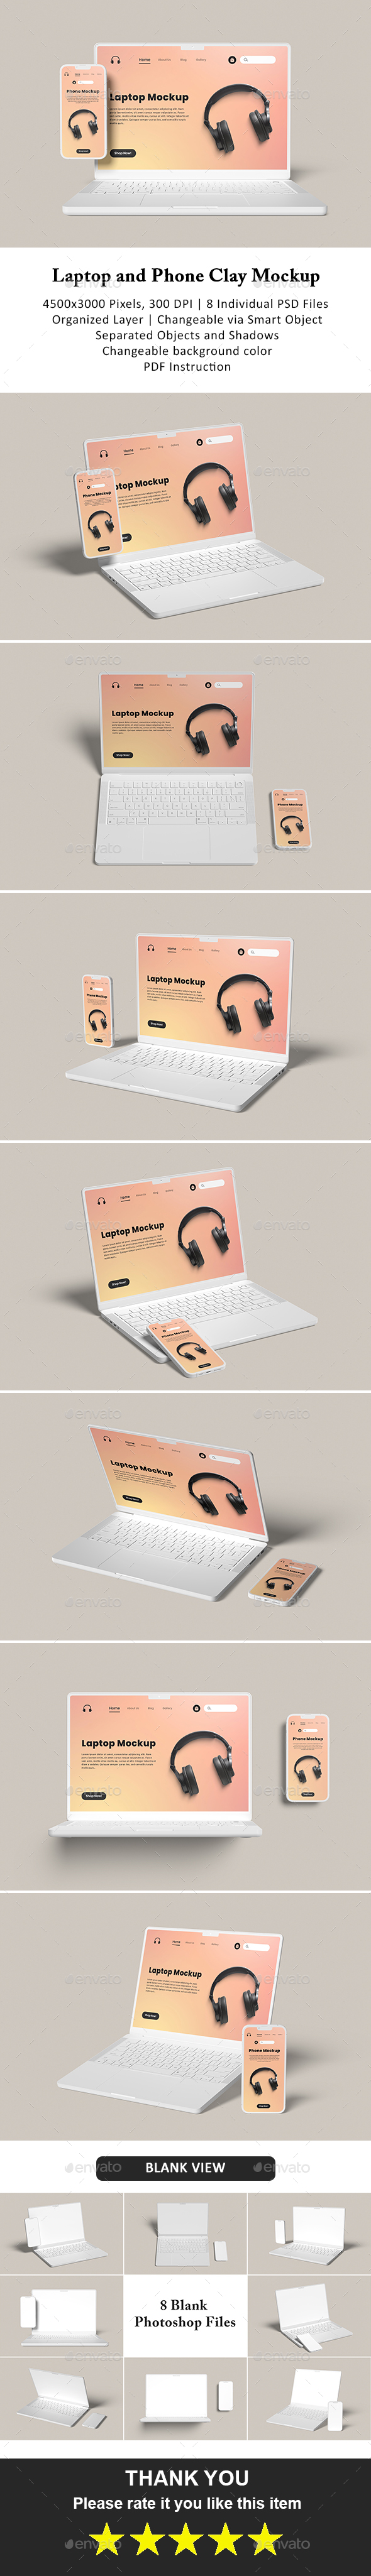 [DOWNLOAD]Laptop and Phone Clay Mockup